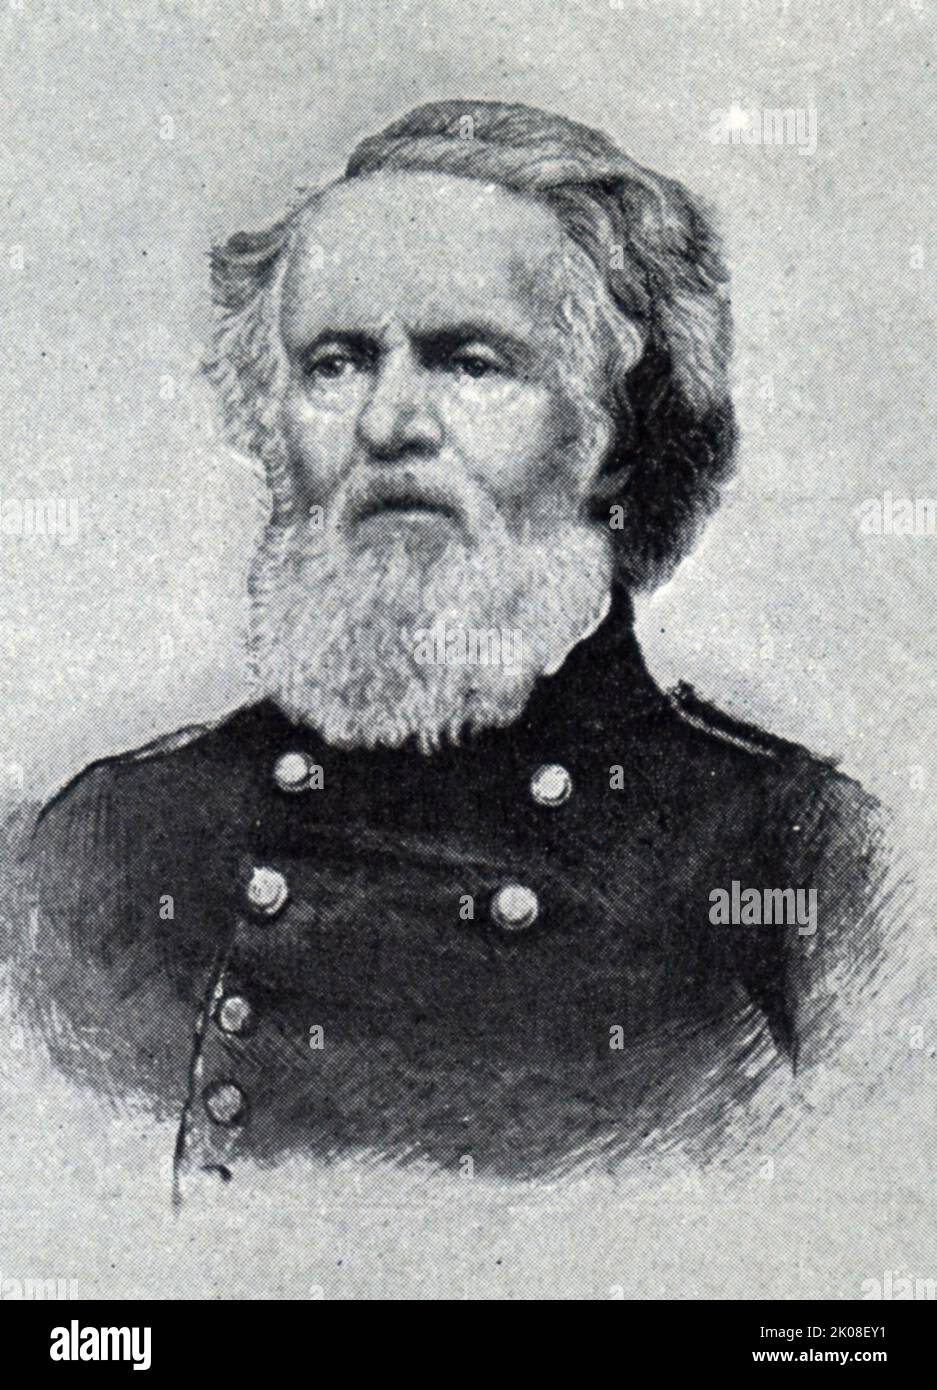 General J. F. K. Mansfield. Joseph King Fenno Mansfield (December 22, 1803 - September 18, 1862) was a career United States Army officer, civil engineer, and a Union general in the American Civil War, mortally wounded at the Battle of Antietam Stock Photo